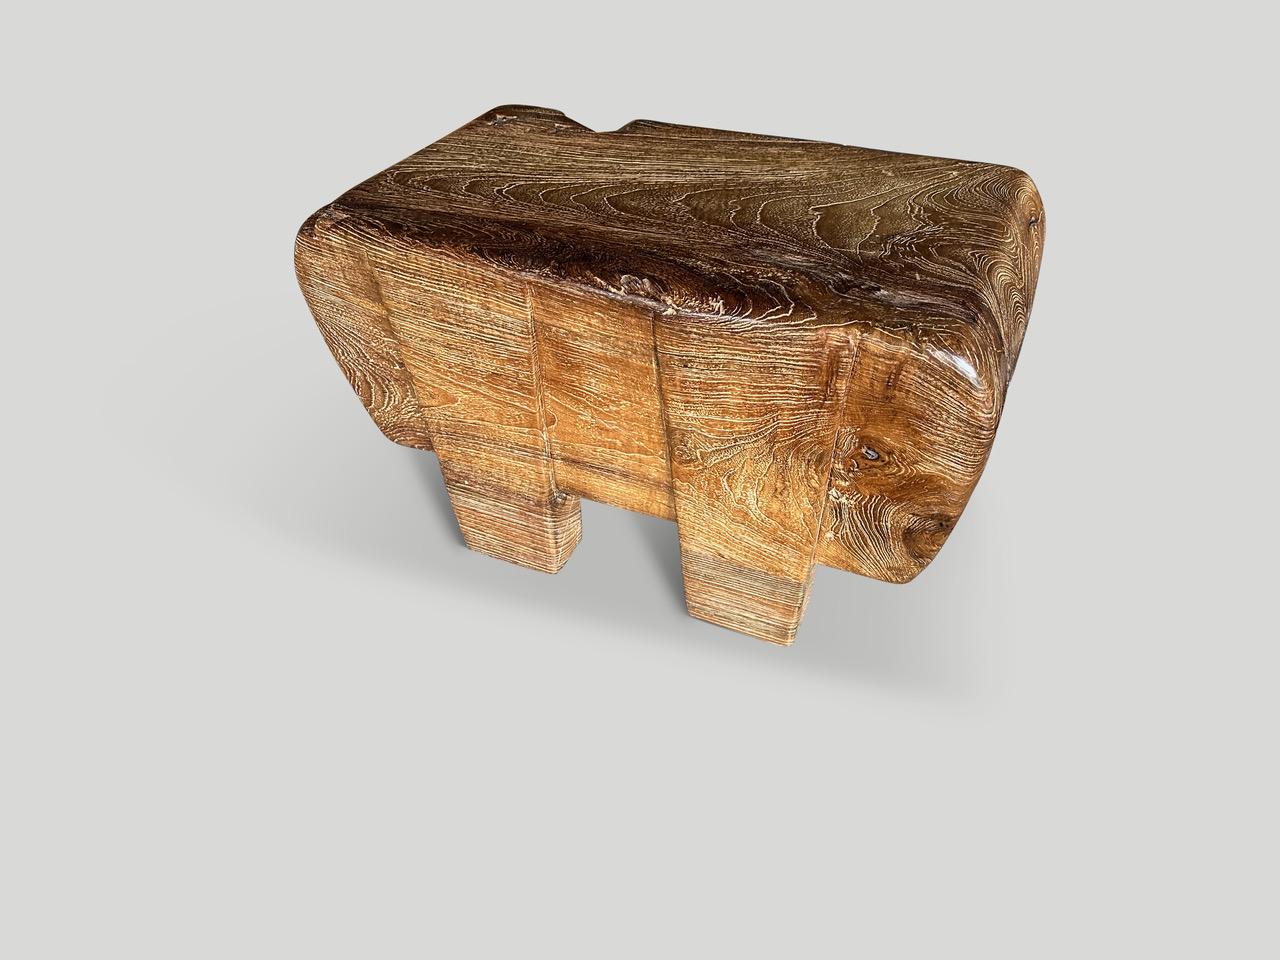 An impressive eleven inch thick teak log floats five inches off the floor on minimalist cut out legs. This one of a kind piece can be used as a small coffee table, side table or bench. We added butterflies inlaid into the top. Finished with a